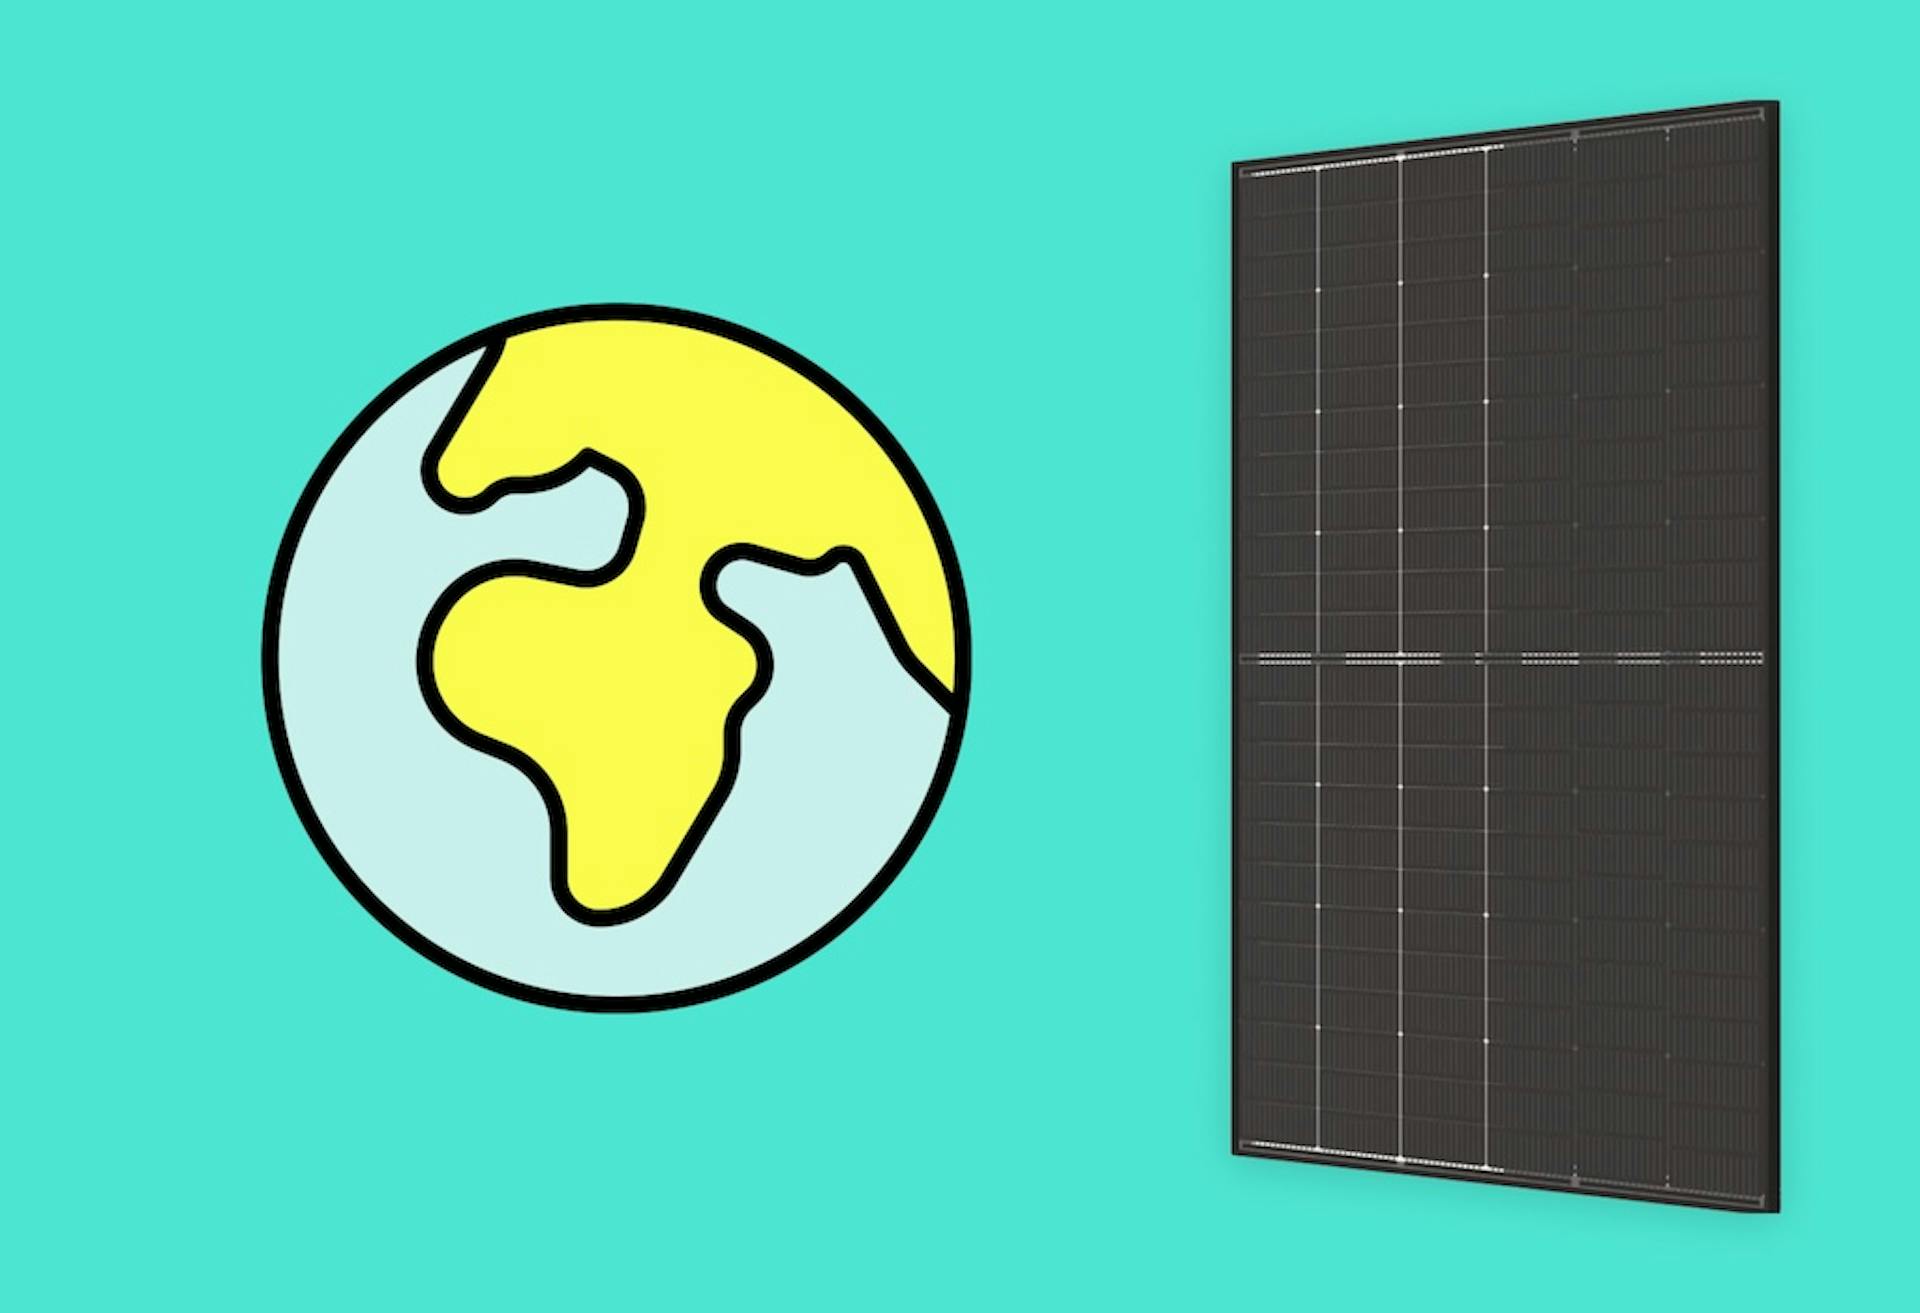 A cartoon globe with yellow countries, a black solar panel next to it, and a turquoise background